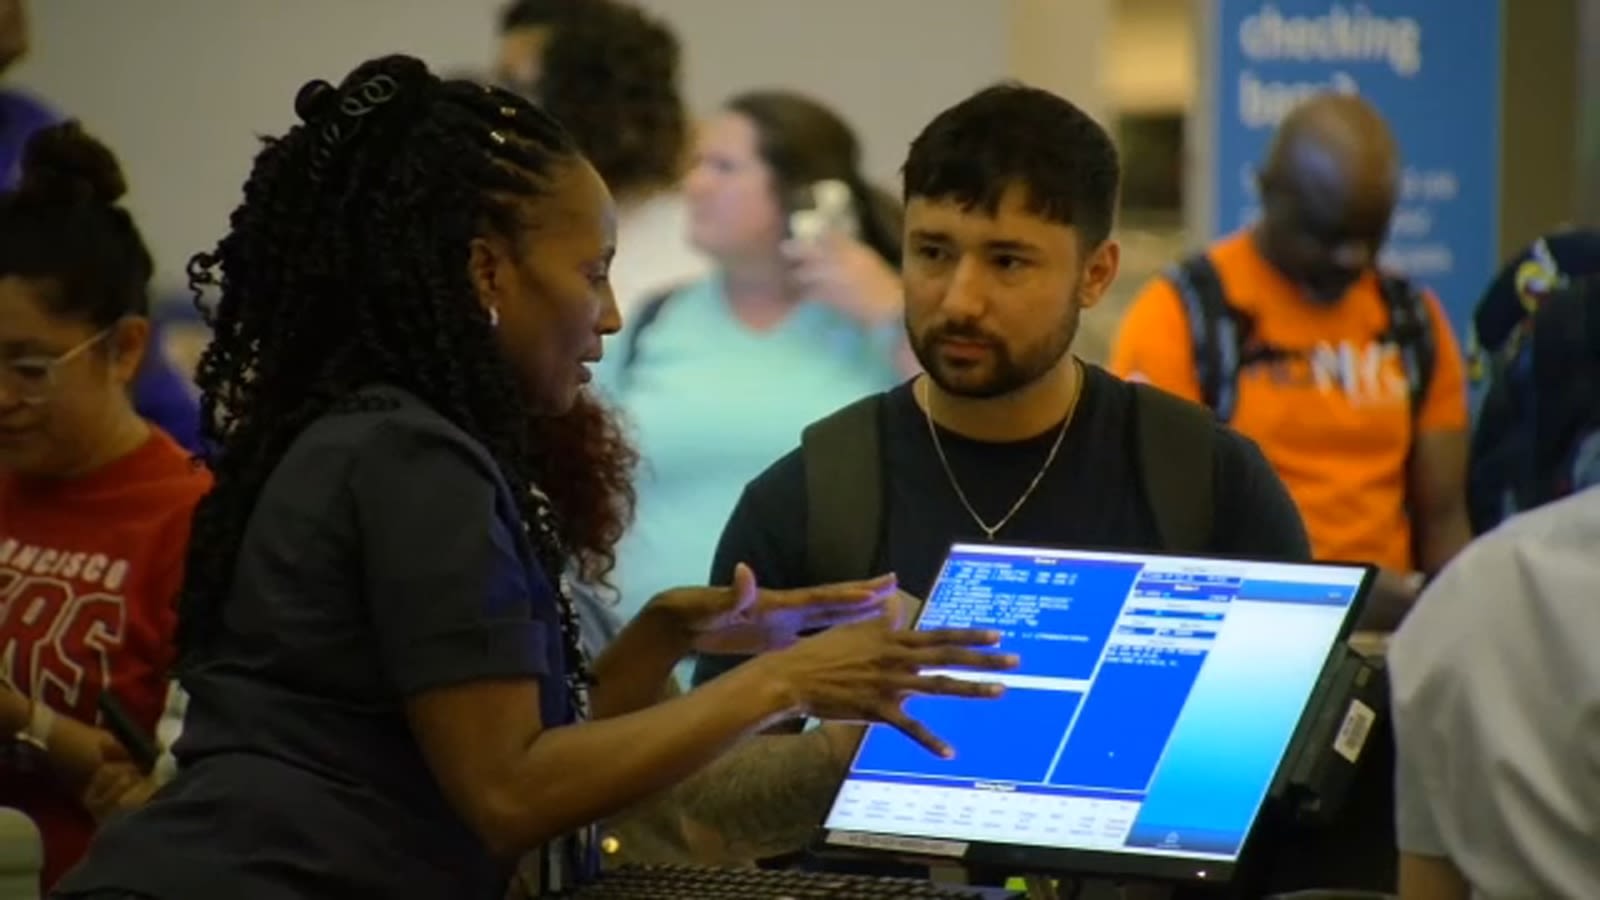 Many flights delayed, canceled at Raleigh-Durham International Airport amid Microsoft outages